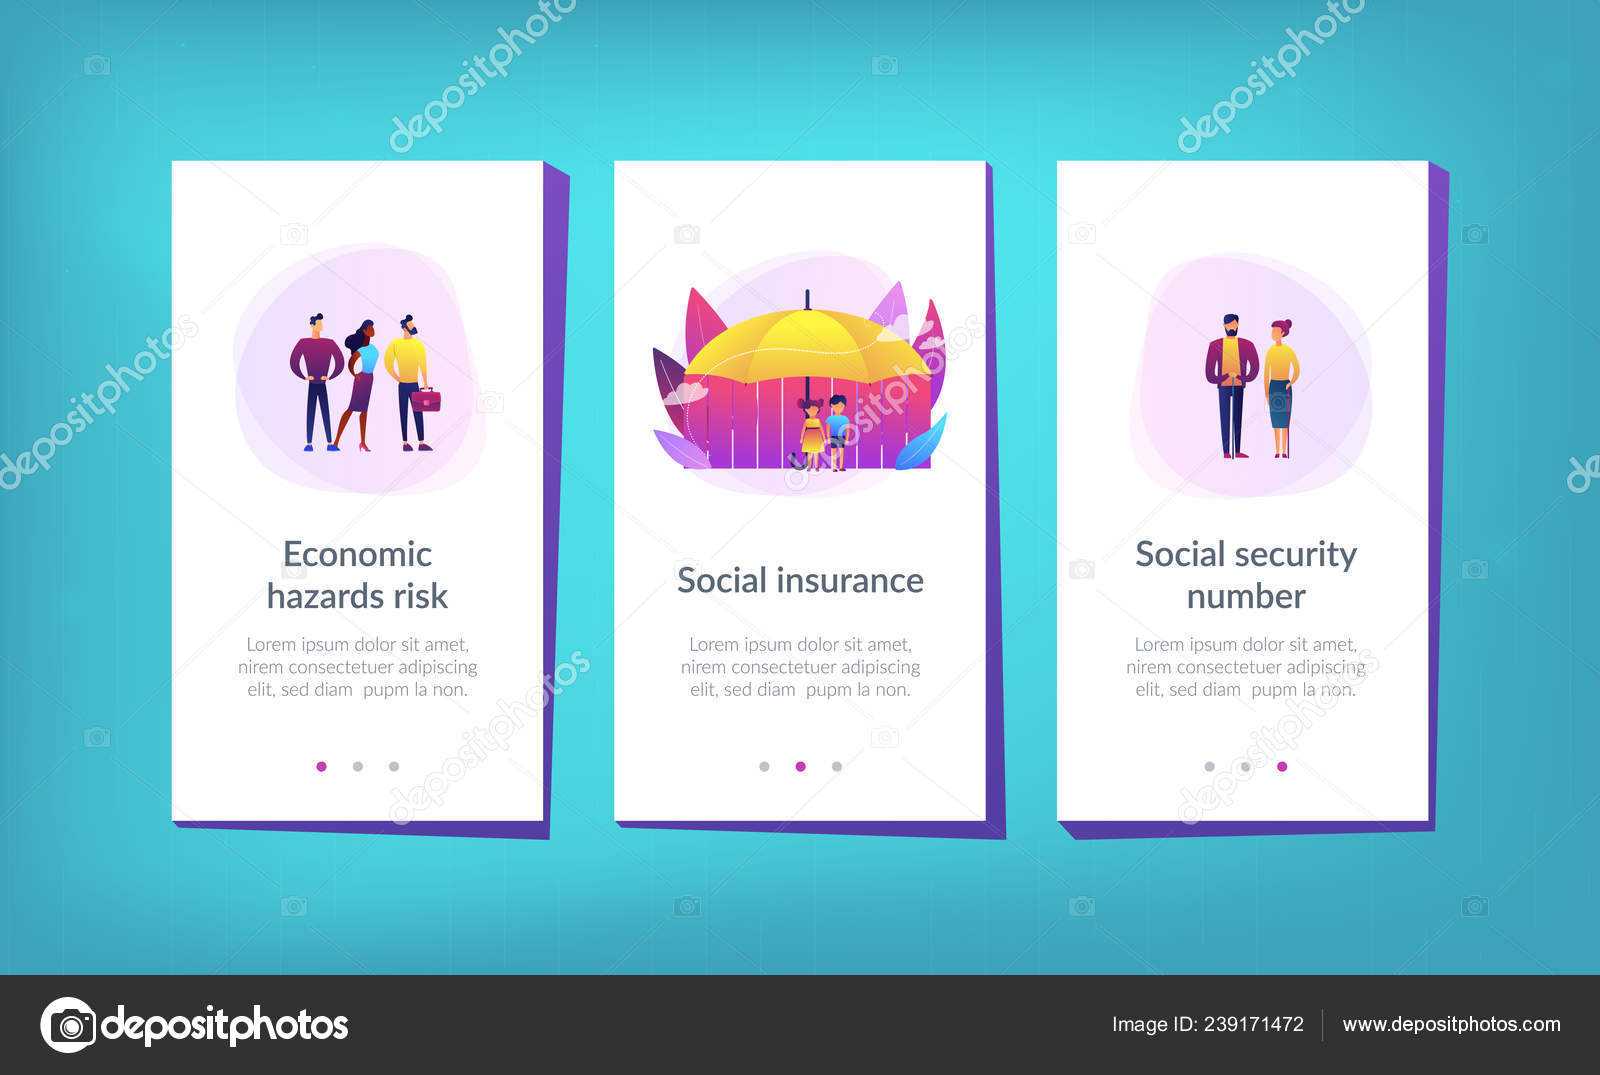 Blank Social Security Card Template | Social Insurance App With Blank Social Security Card Template Download